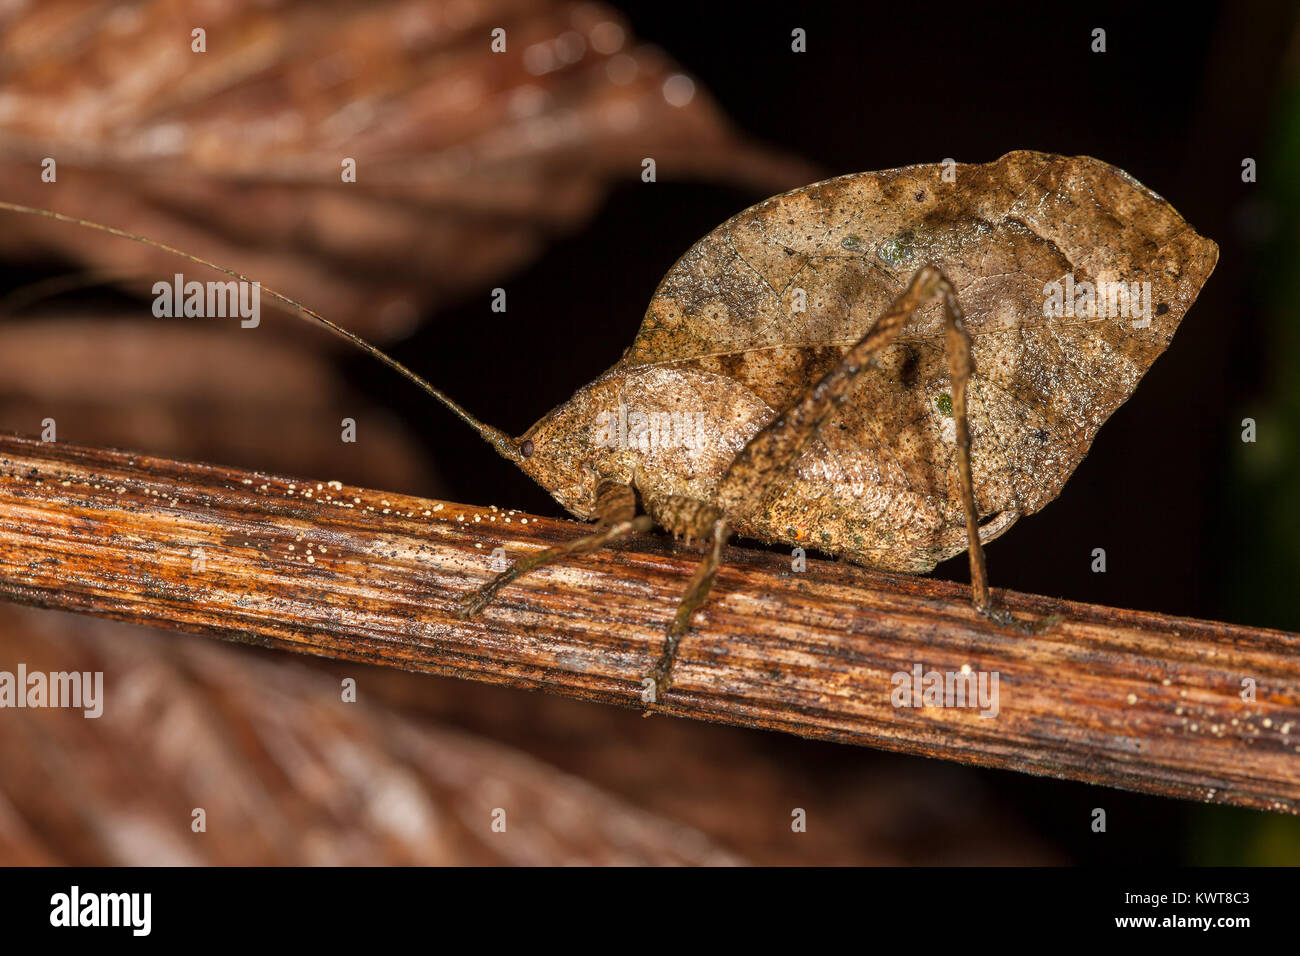 A well-camouflaged dead leaf-mimicking katydid (Order Orthoptera, Family Tettigoniidae) in the lowland rainforests of Peru. An excellent example of cr Stock Photo